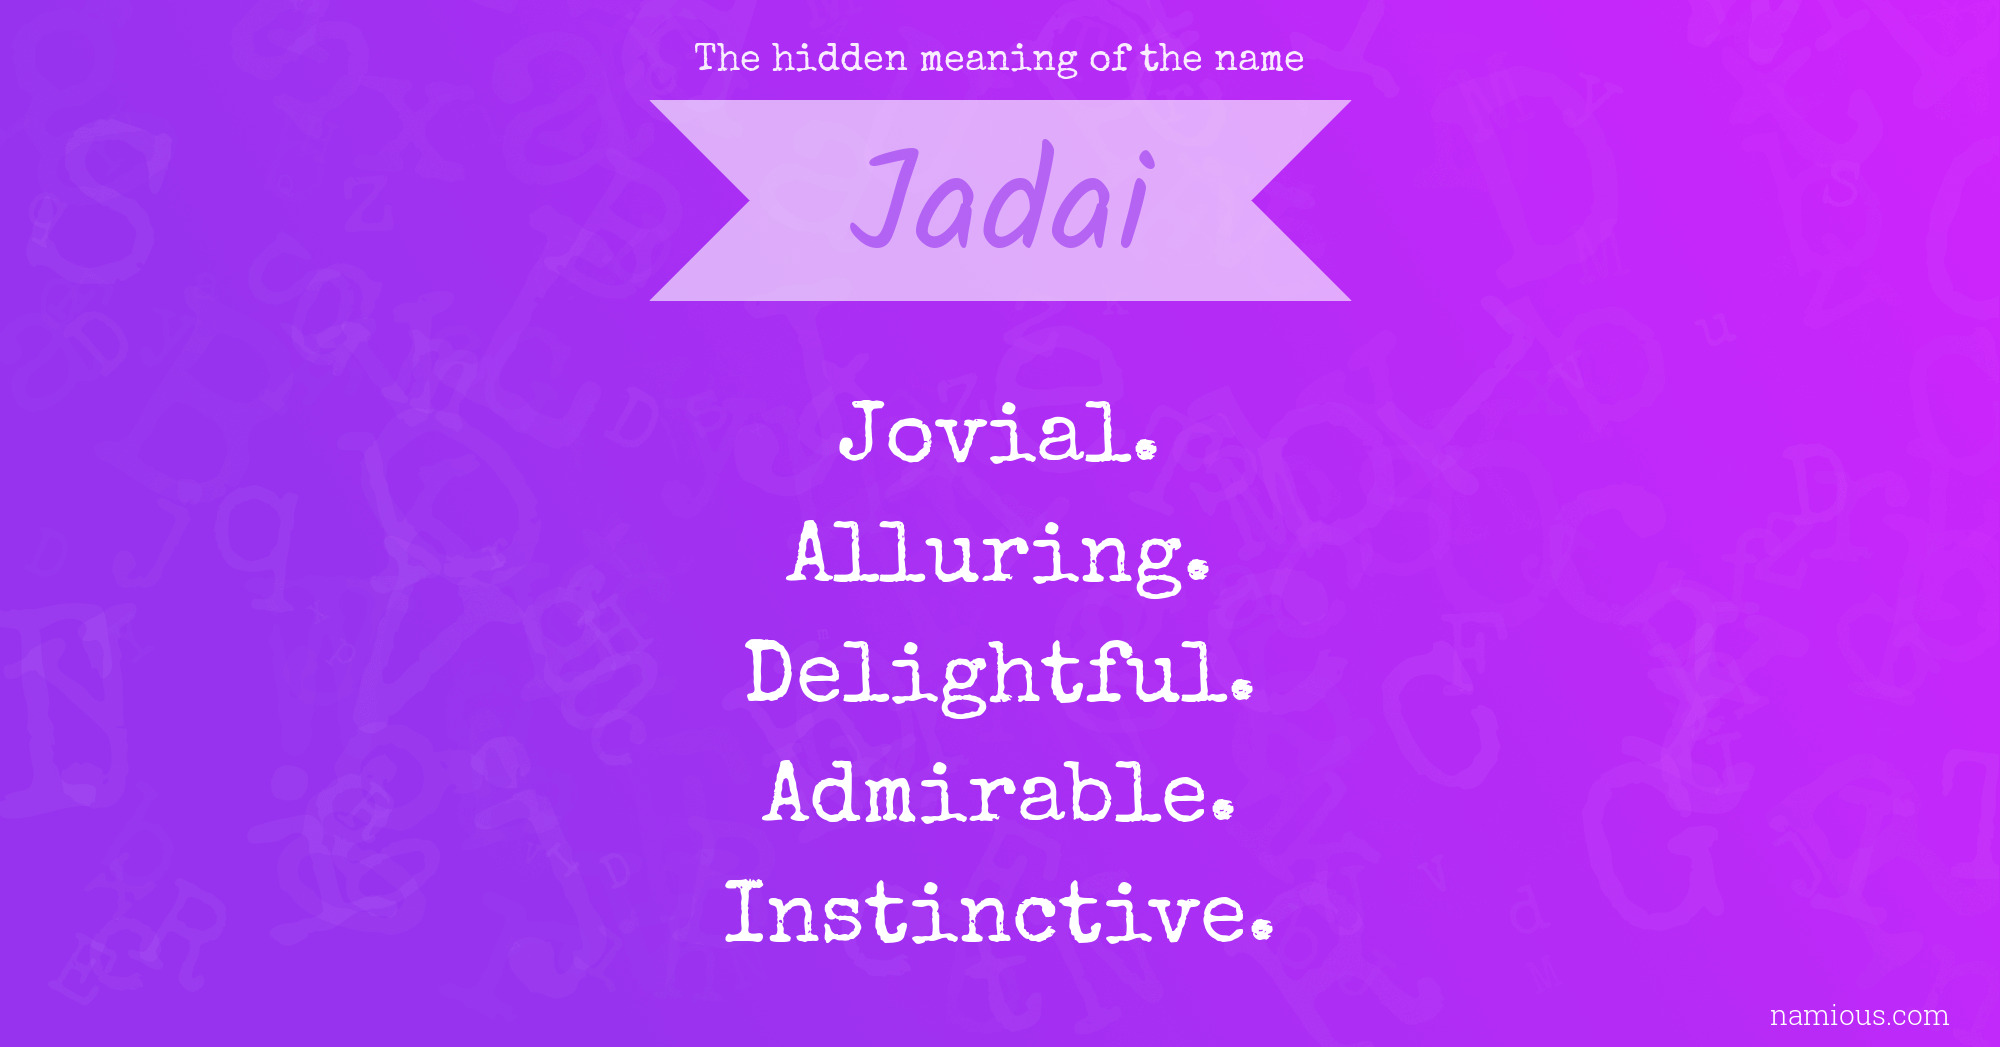 The hidden meaning of the name Jadai